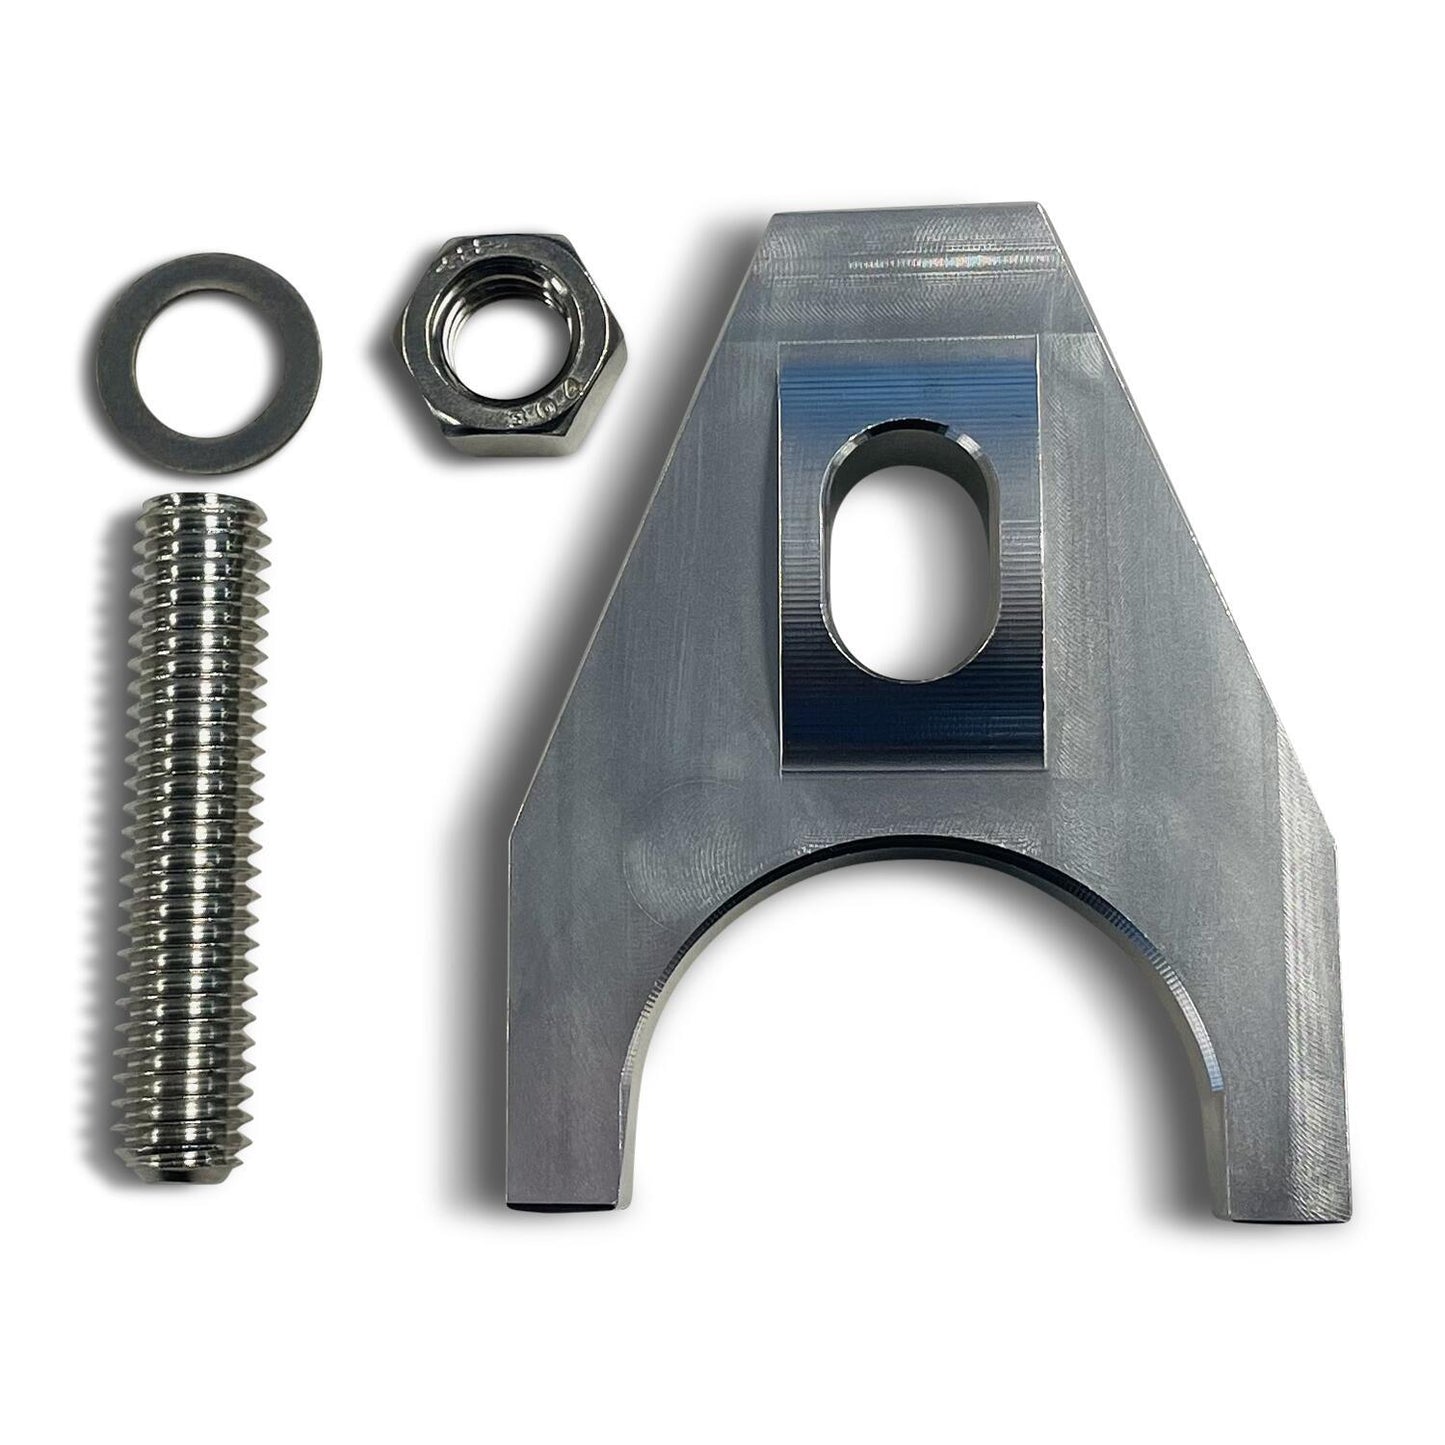 Proform PR66985 H/D Polshed Alloy Distributor Hold Down Clamp suits Chev V8